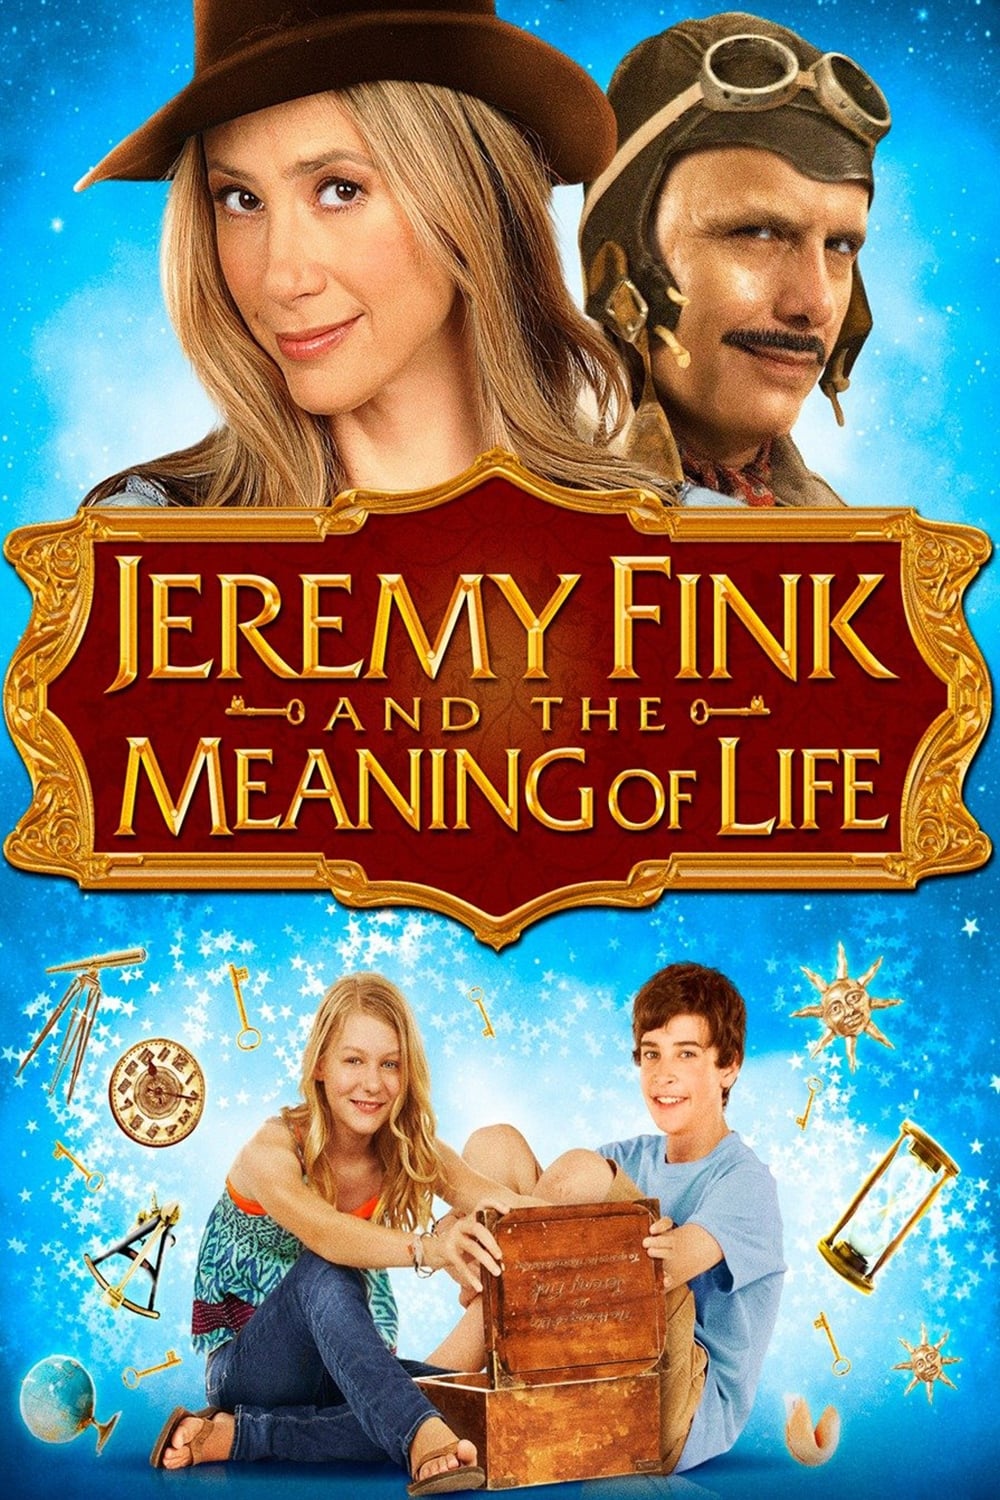 Jeremy Fink and the Meaning of Life film